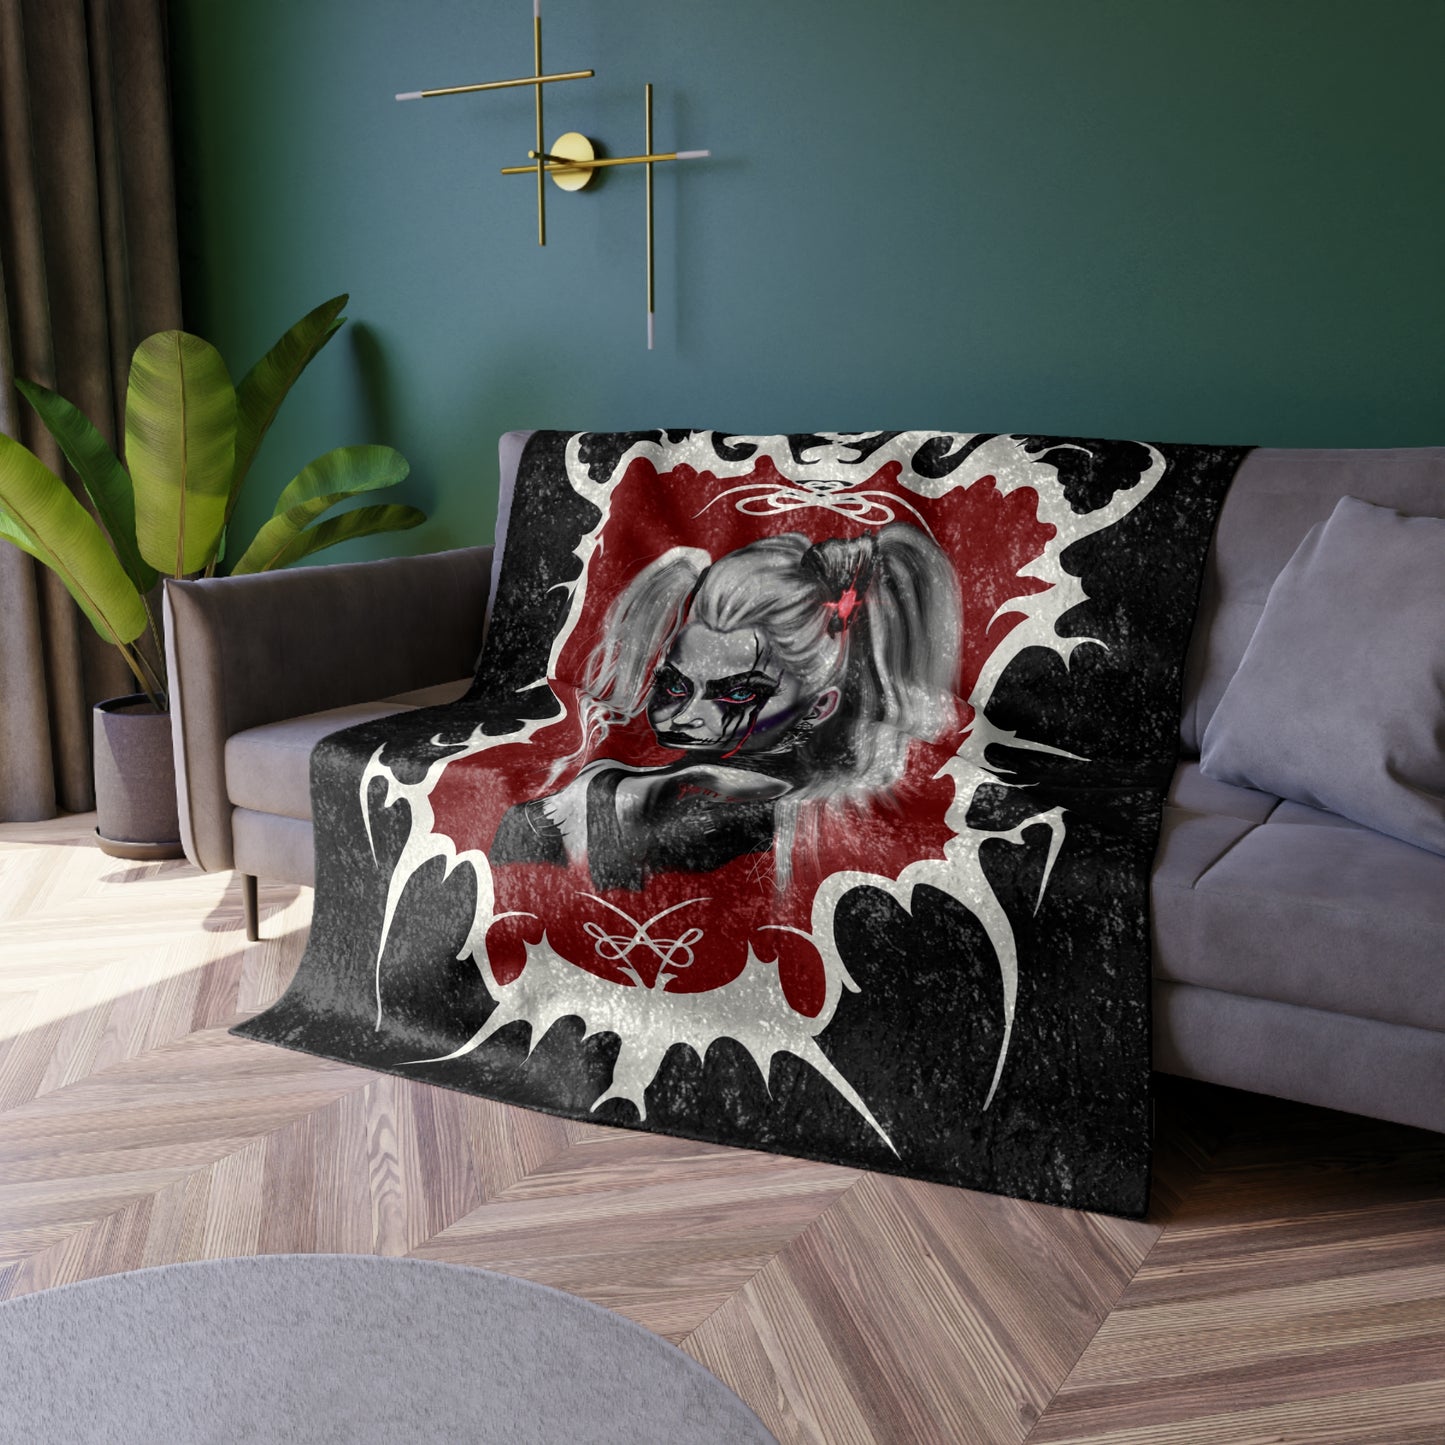 Gothic Red and Black Pretty Dead Zombie Crushed Velvet Blanket